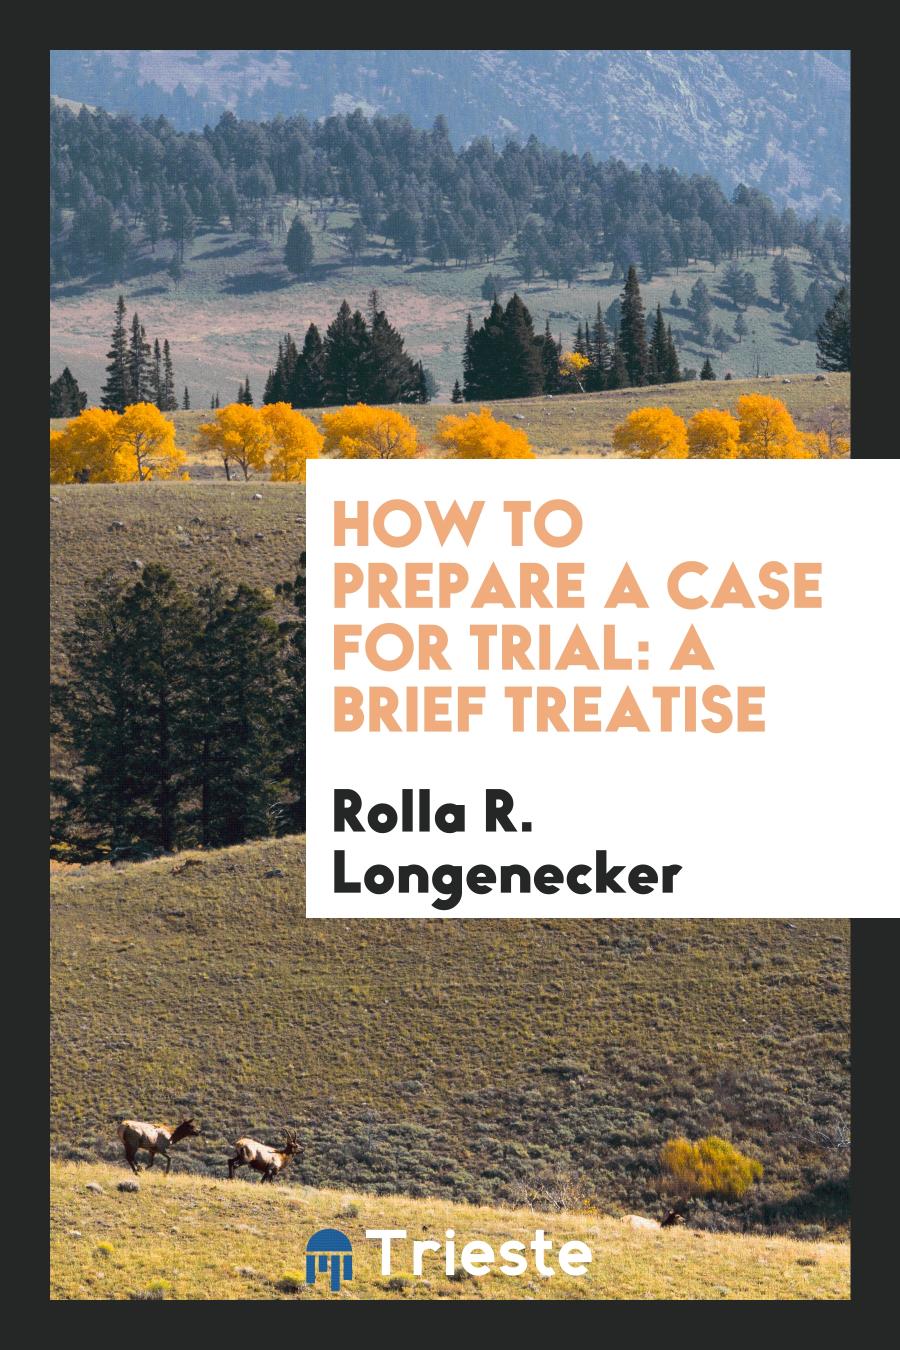 How to Prepare a Case for Trial: A Brief Treatise